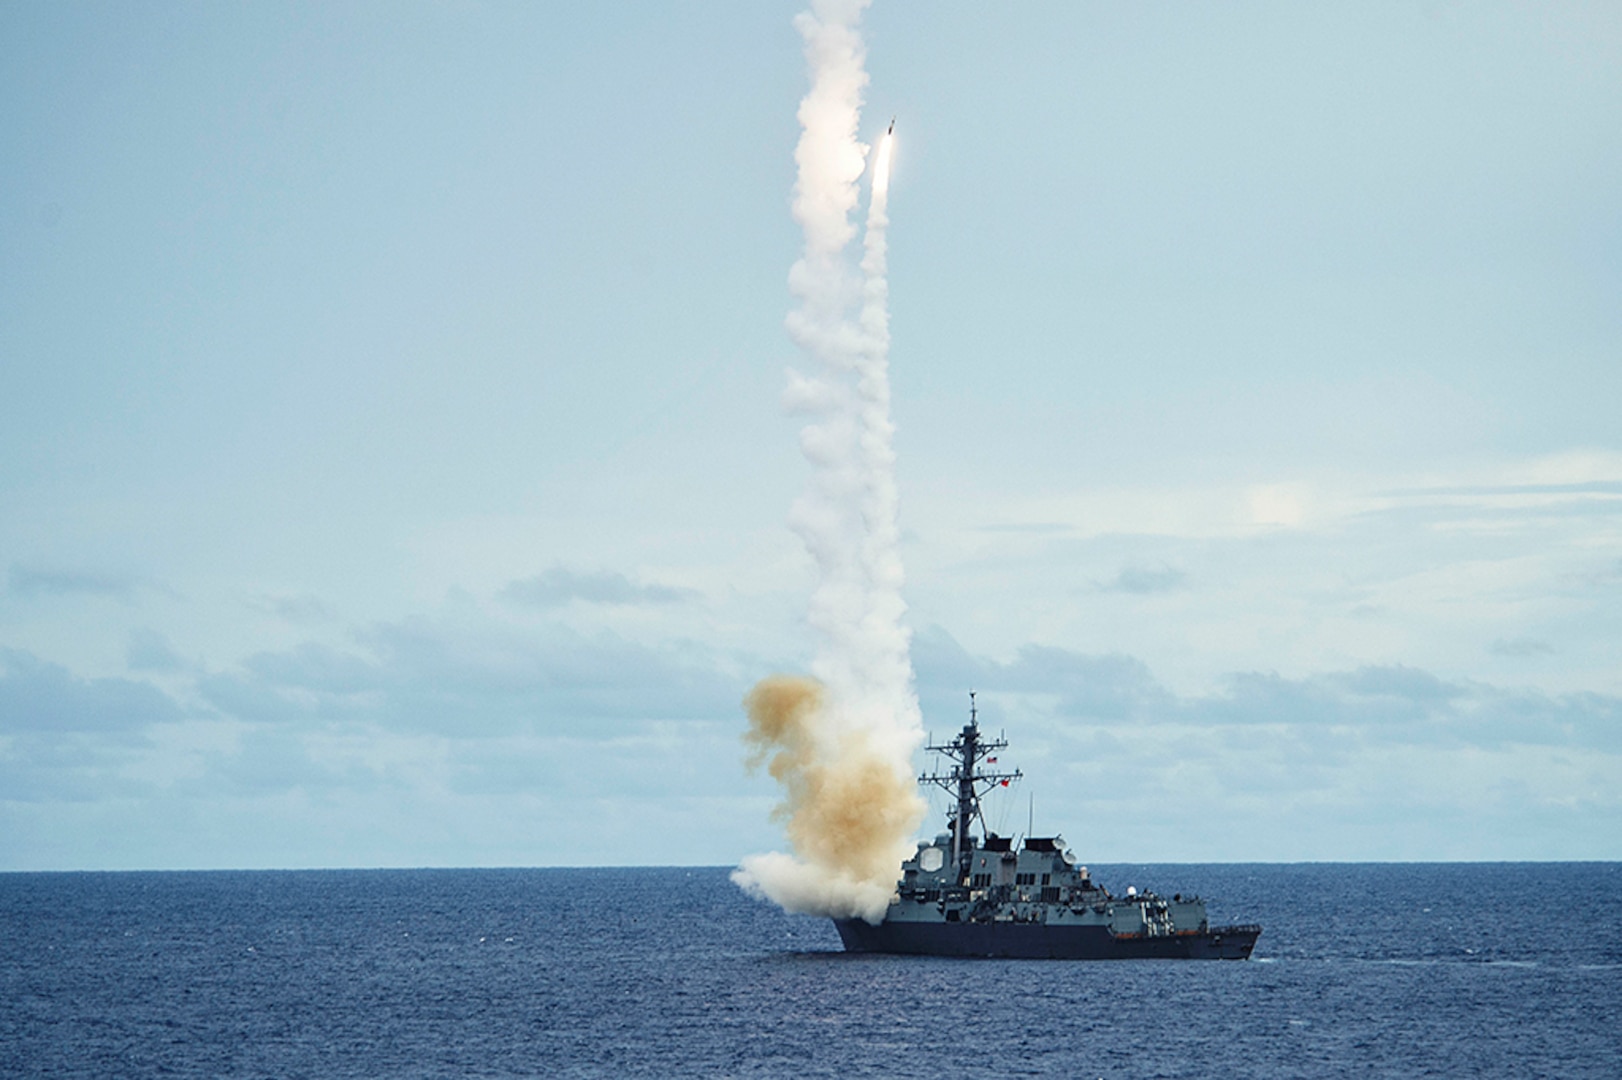 The Arleigh Burke-class guided-missile destroyer USS McCampbell (DDG 85) fires a standard missile (SM 2) at a target drone as part of a surface-to-air-missile exercise (SAMEX) during Valiant Shield 2016. Valiant Shield is a biennial, U.S. only, field-training exercise with a focus on integration of joint training among U.S. forces. This is the sixth exercise in the Valiant Shield series that began in 2006. McCampbell is on patrol with Carrier Strike Group Five (CSG 5) in the Philippine Sea supporting security and stability in the Indo-Asia-Pacific region.